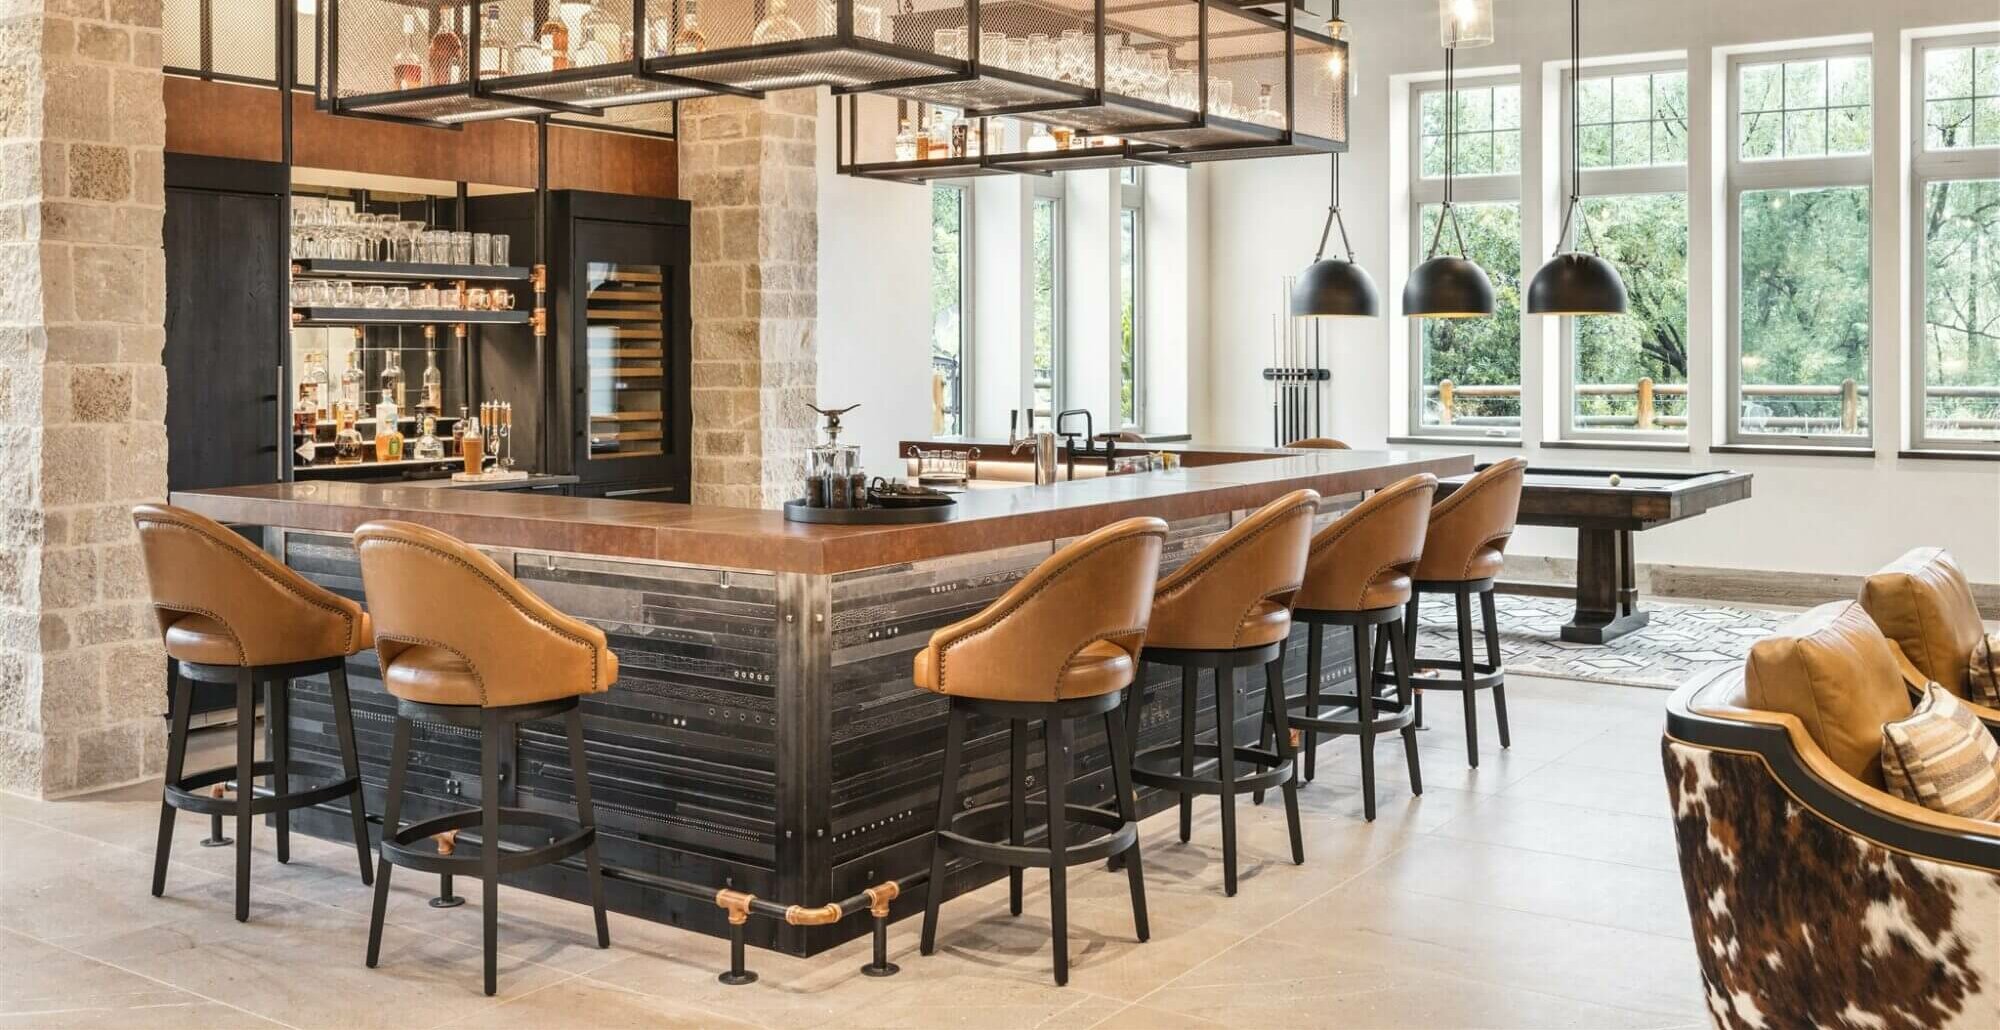 A rustic kitchen with a bar and cowhide stools.